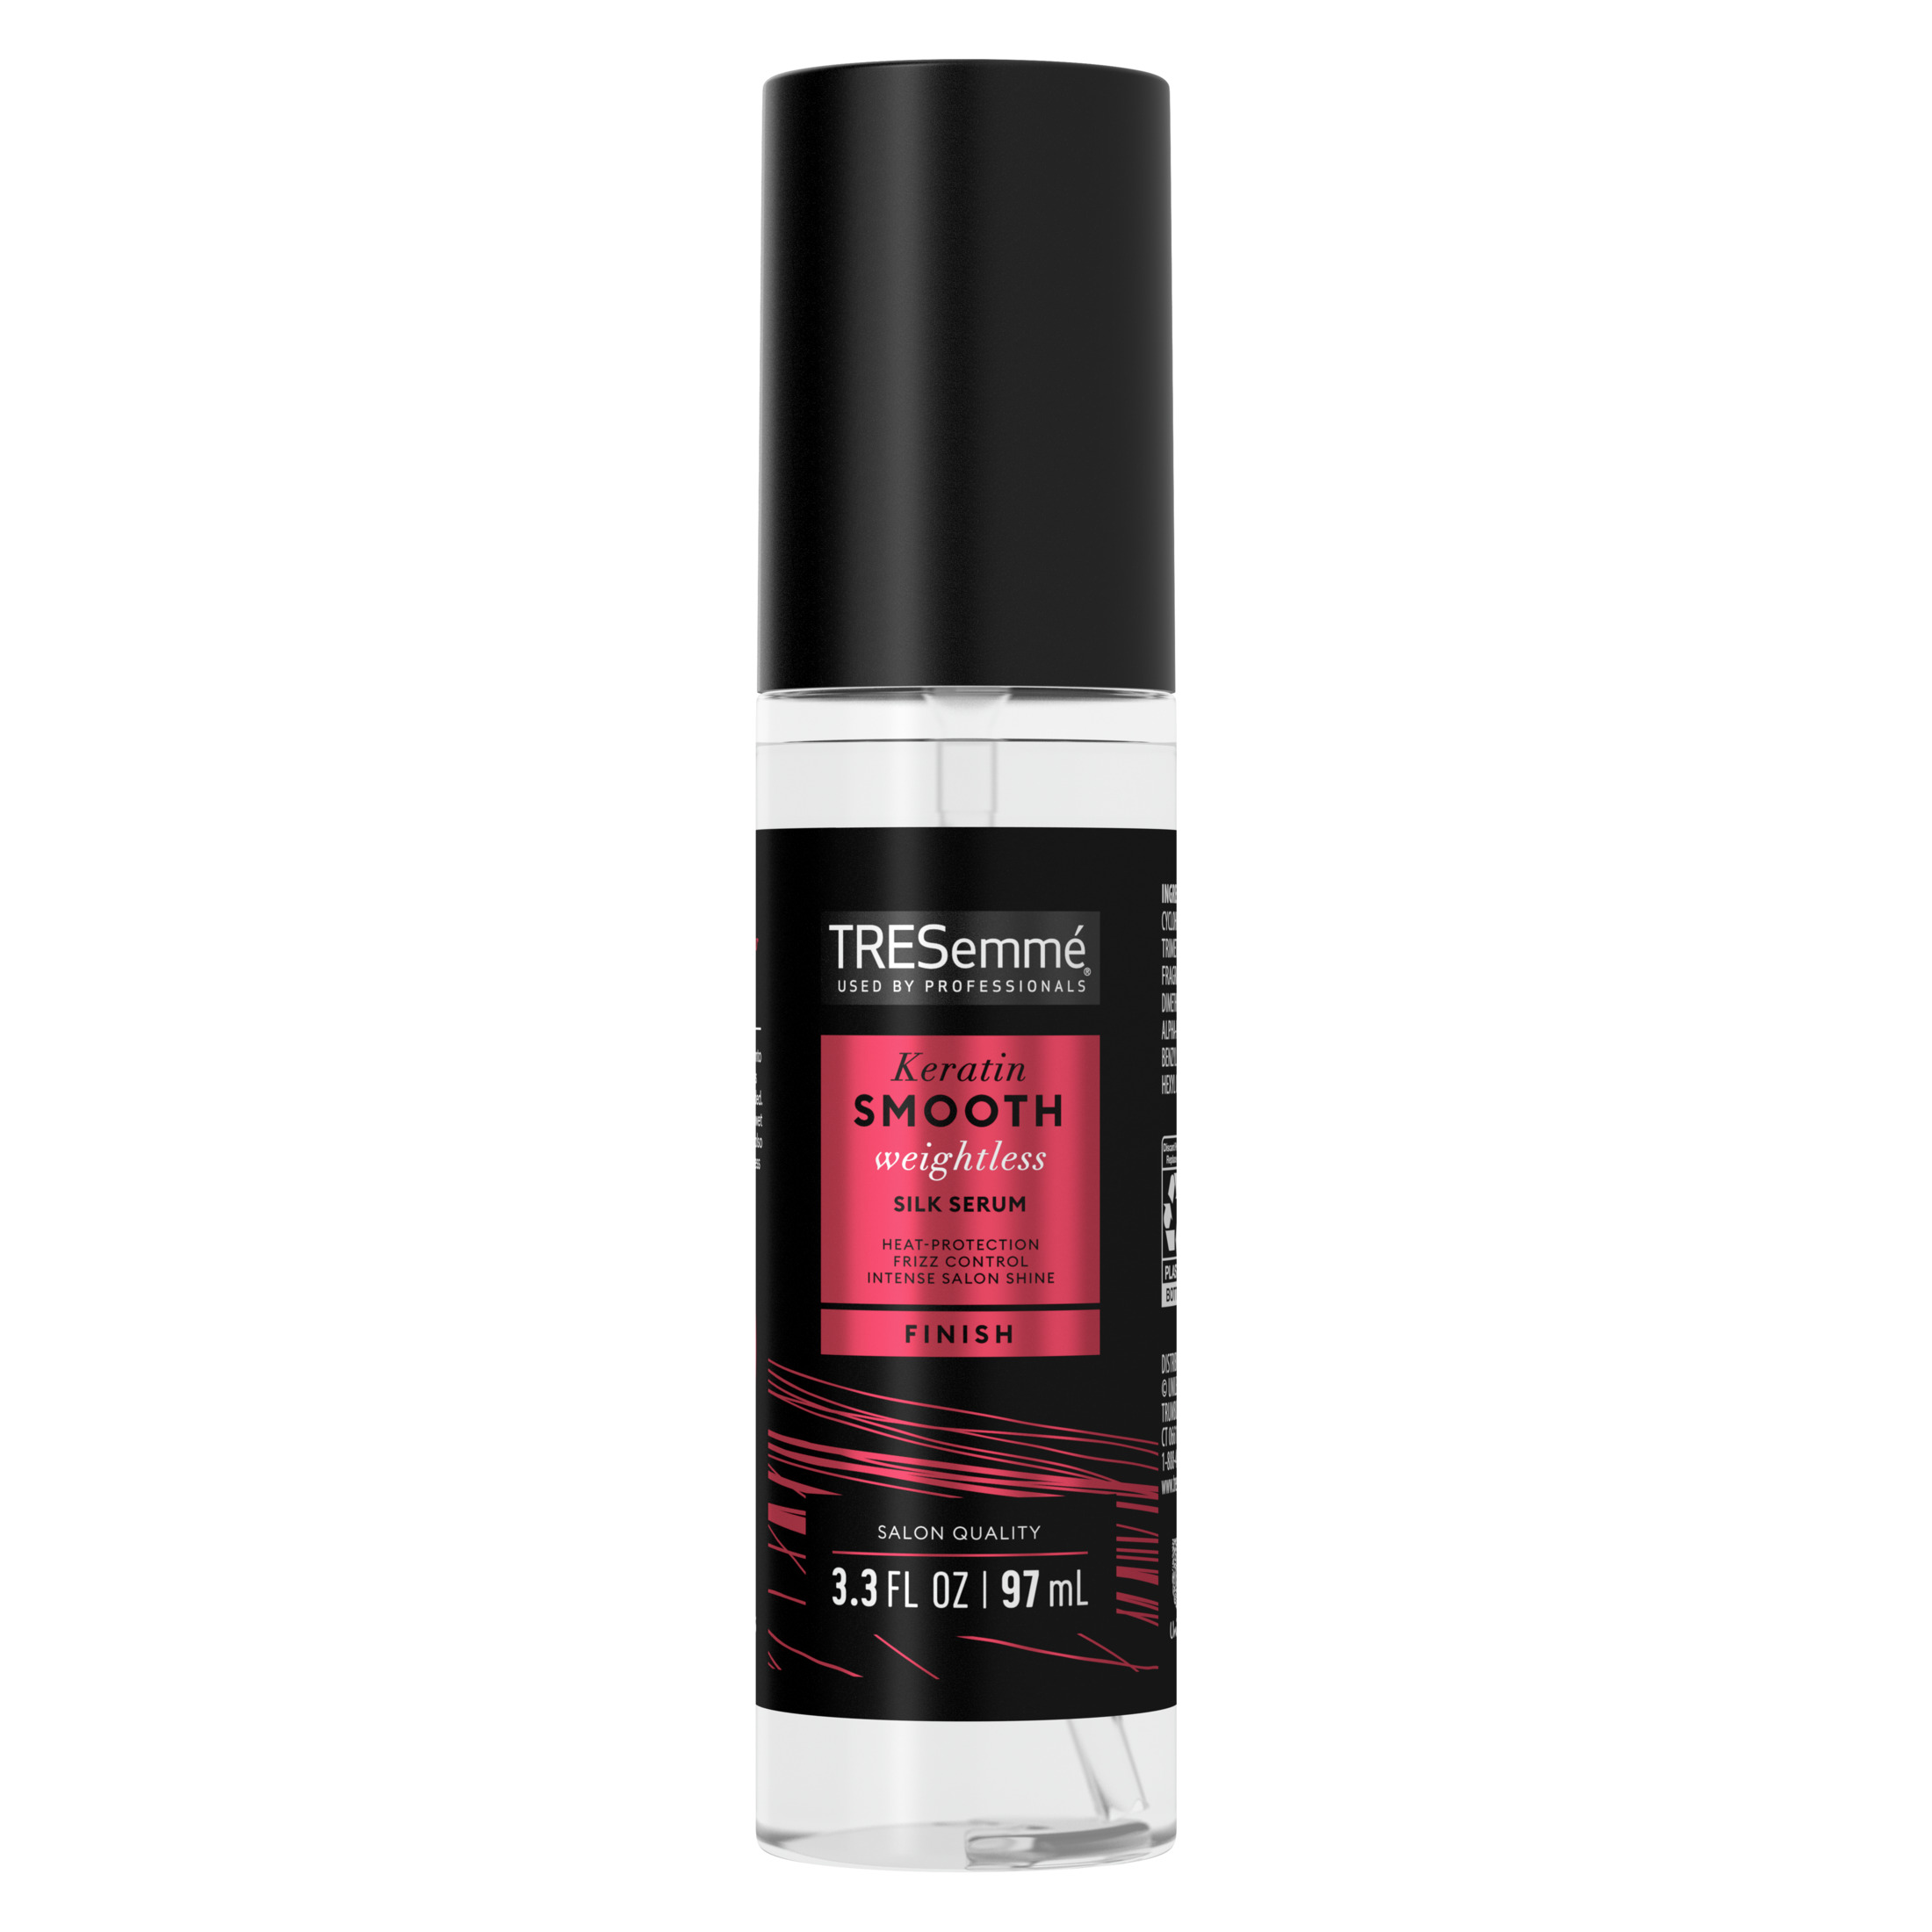 TRESemme Keratin Smooth Detangling Hair Serum for Shine Heat Protection & Frizz Control, 3.3 fl oz - image 1 of 11